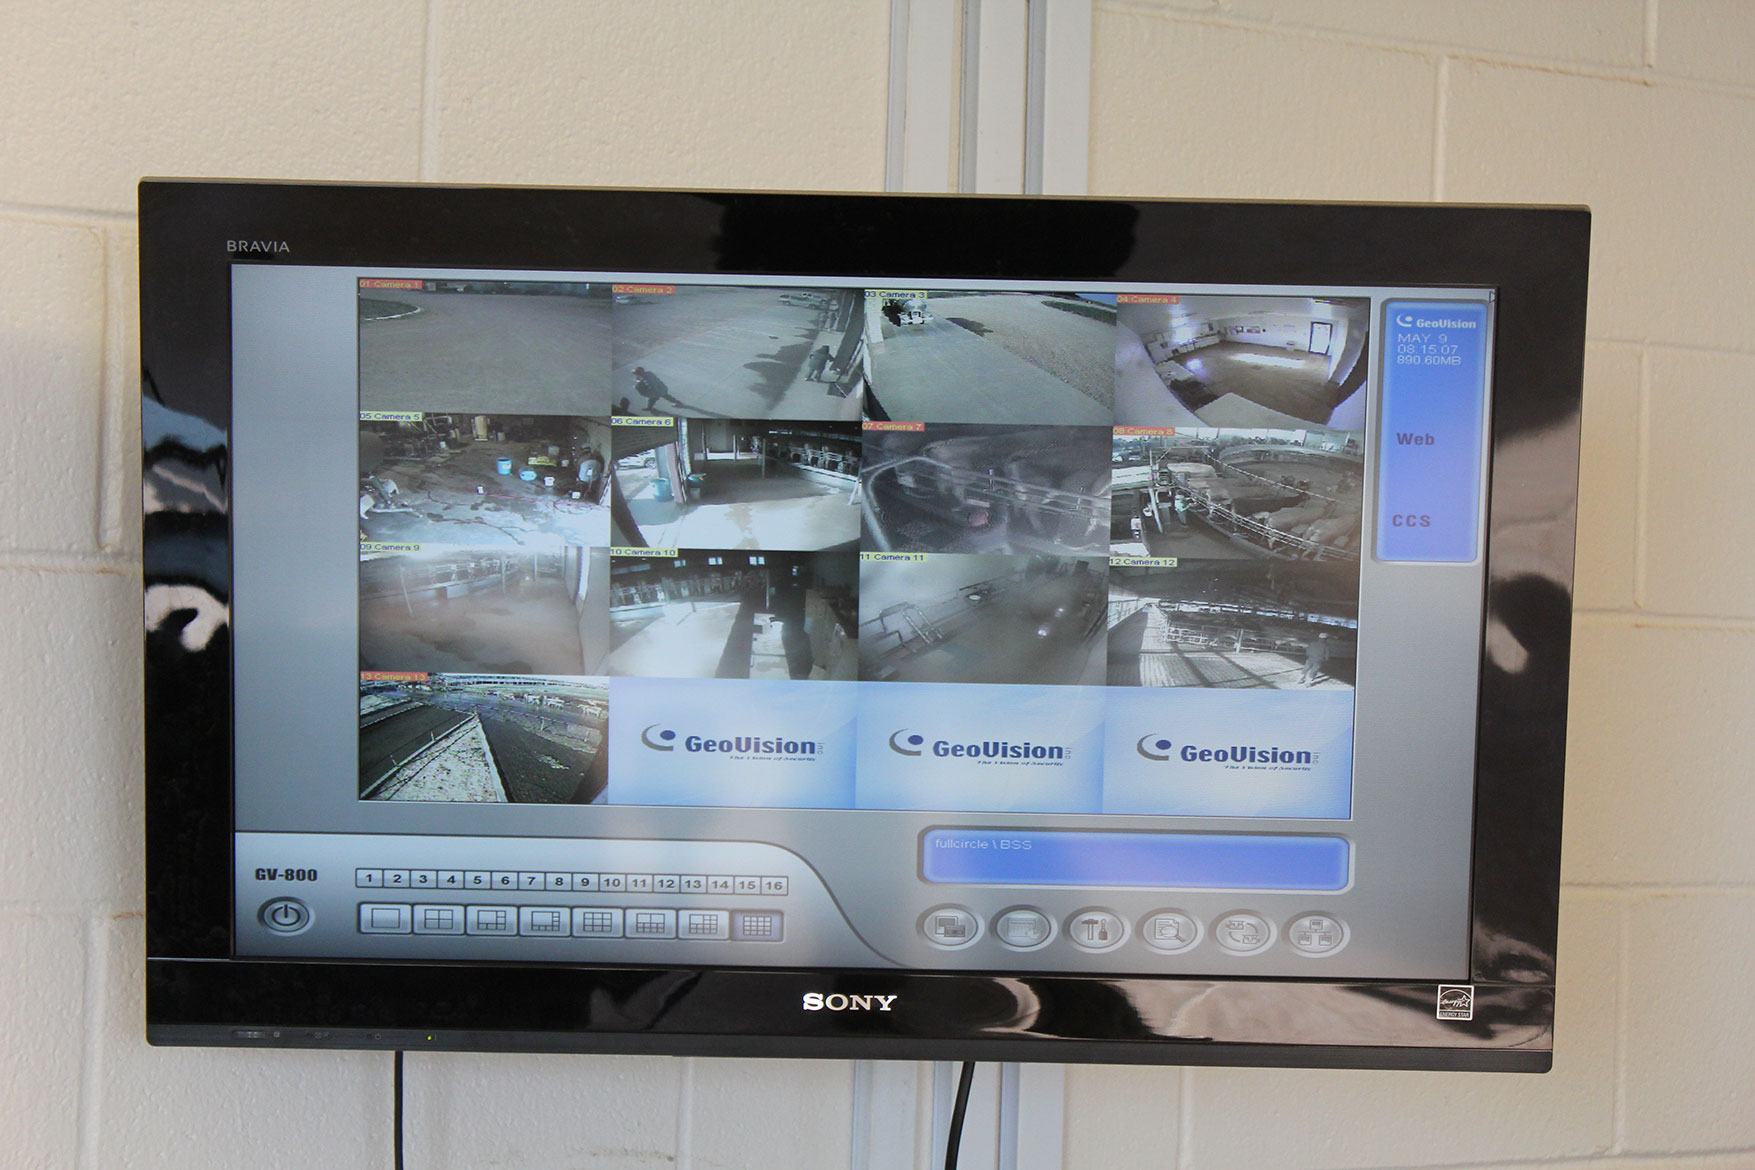 Cameras monitor various places at the dairy farm to ensure security of animals and people.